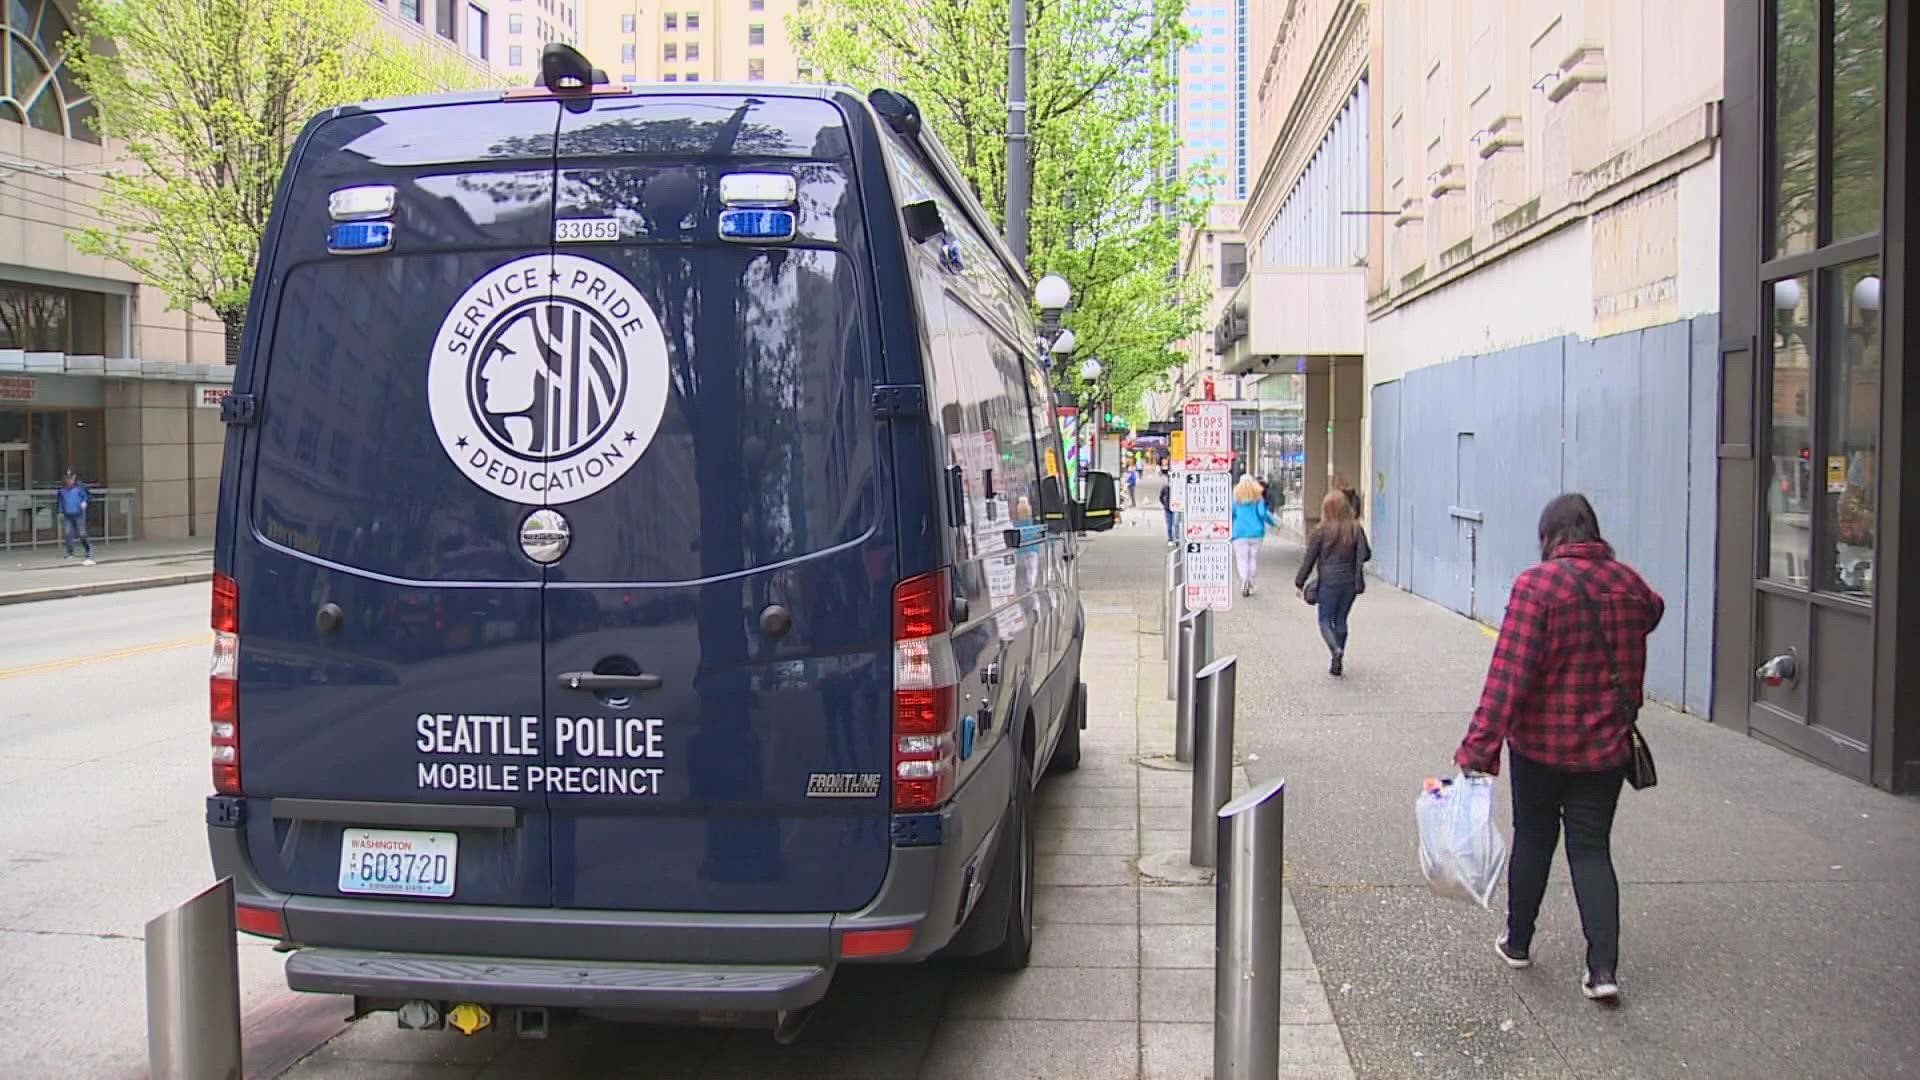 The trend is projected to continue. Data show the Seattle Police Department expects to hire 98 more officers in 2022 and lose 113.